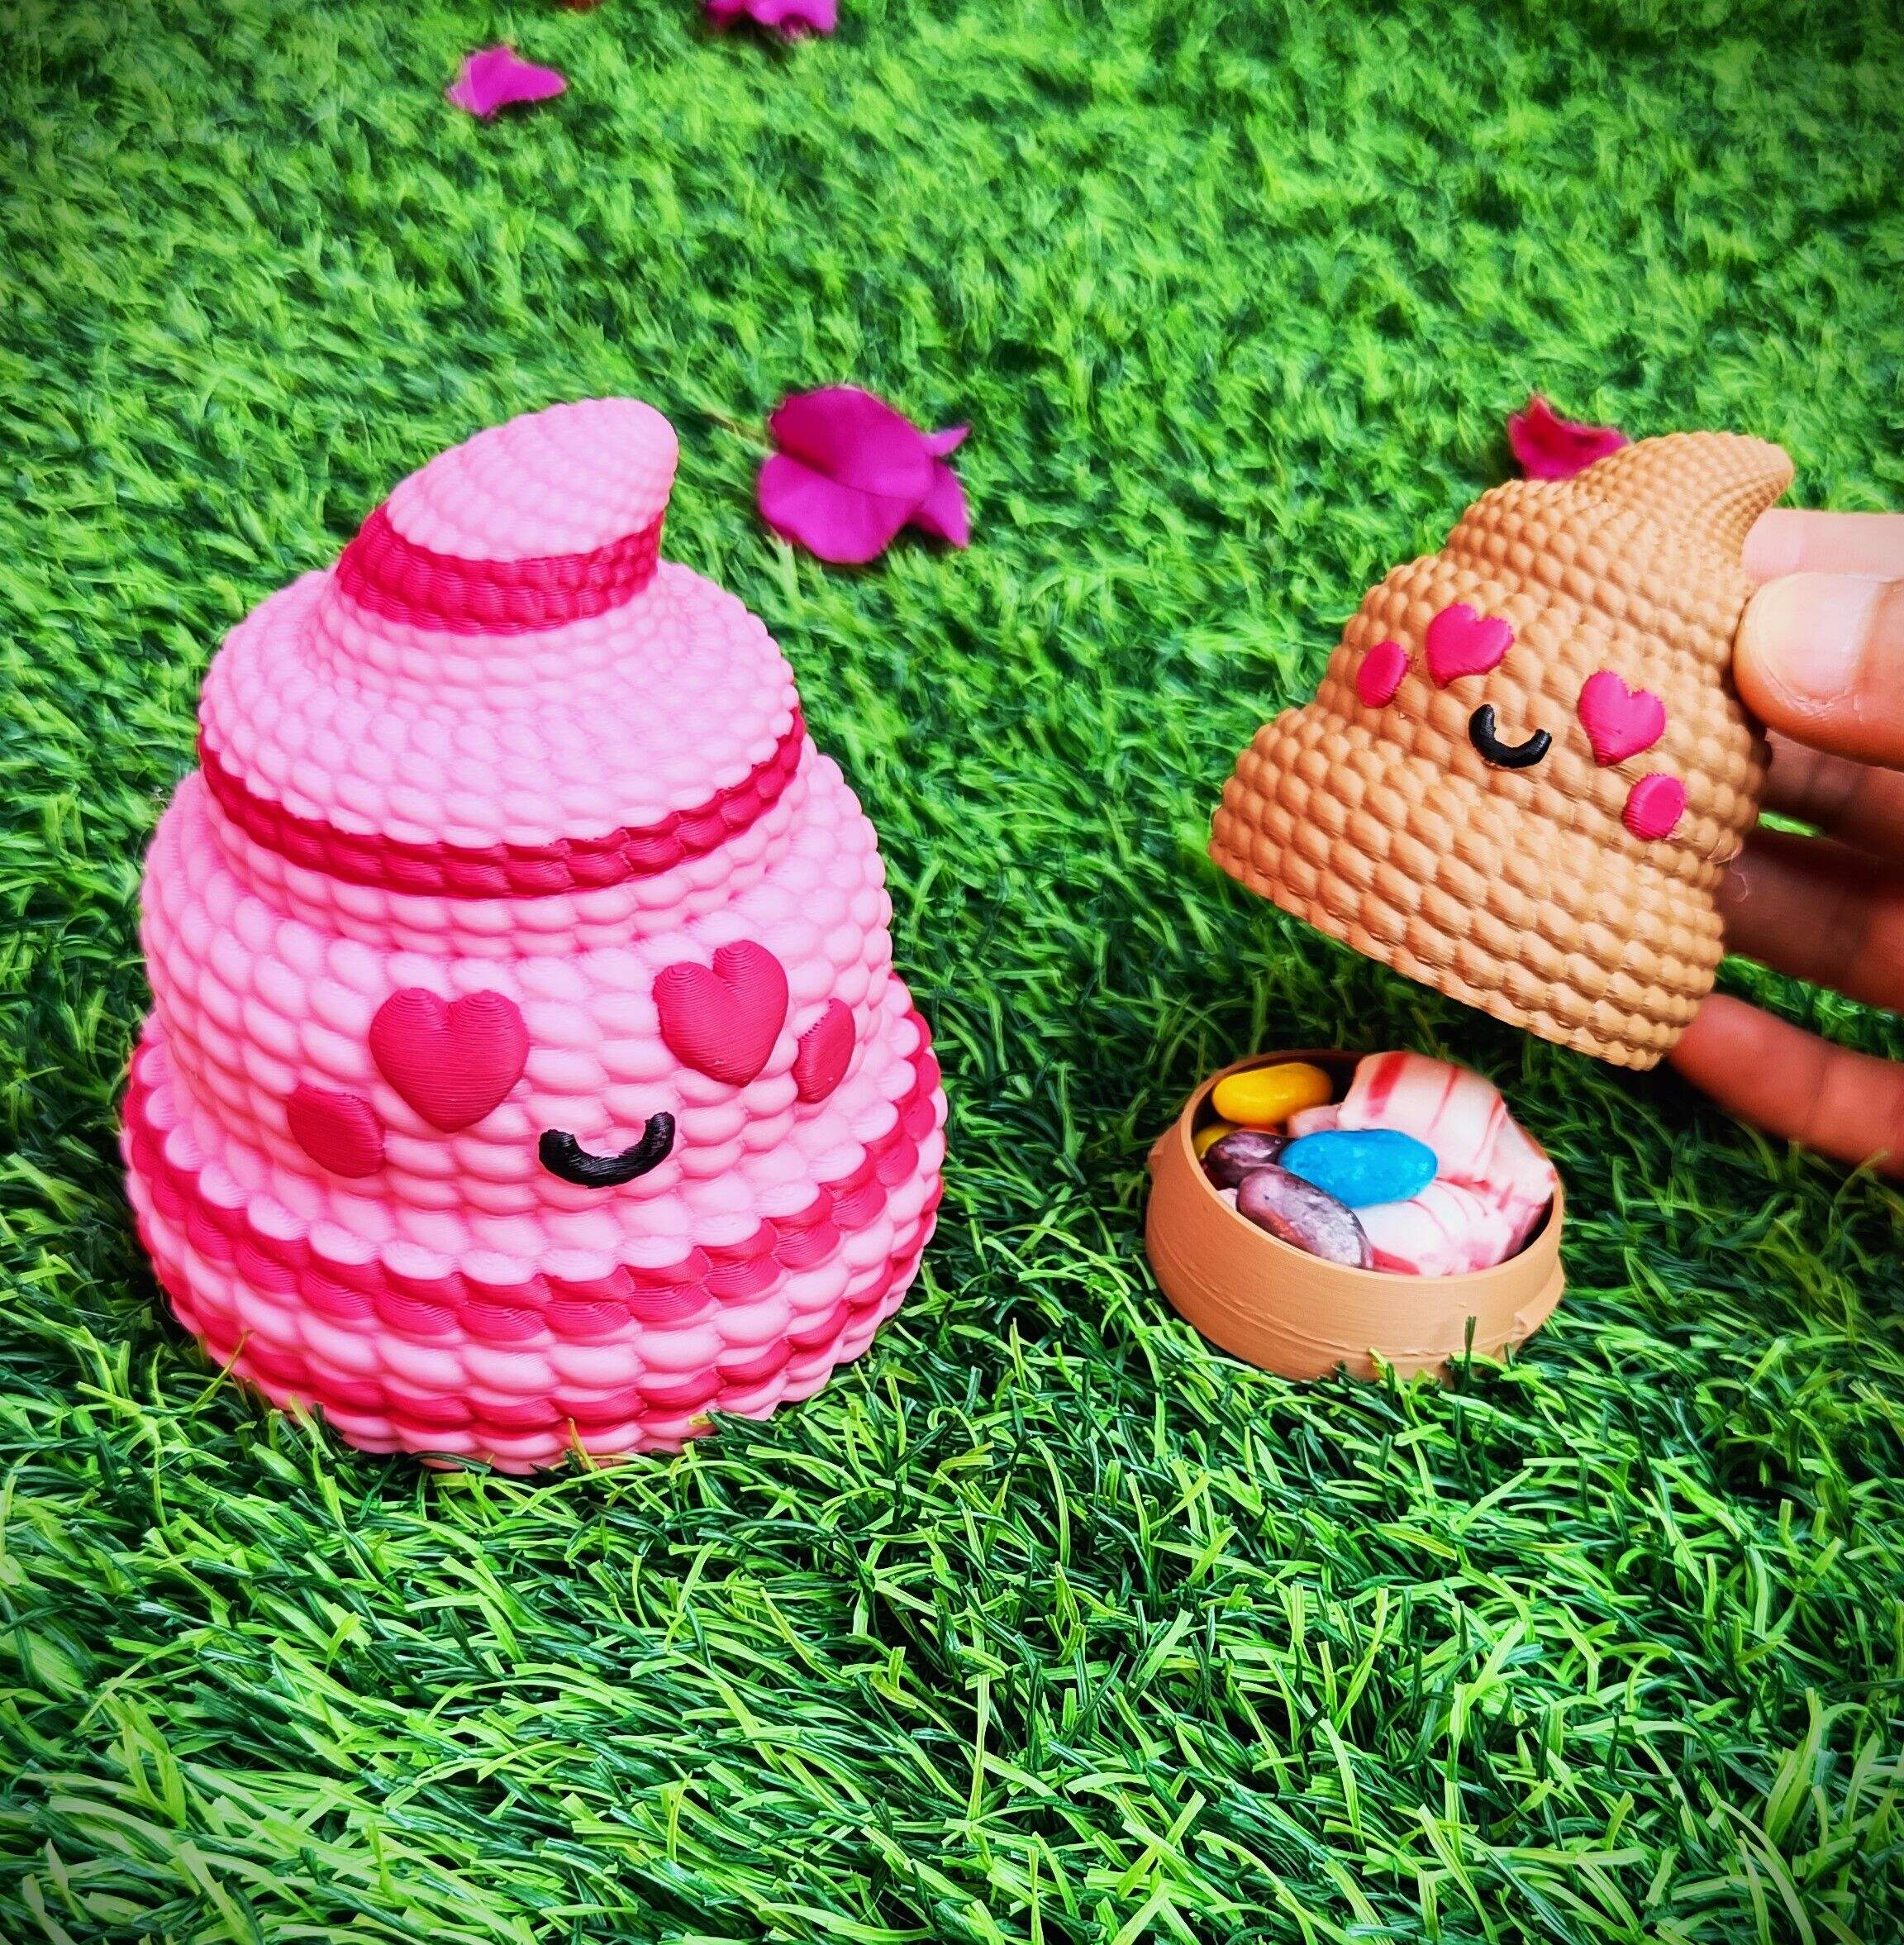 Poop Love - Valentine's Day multicolor knitted container